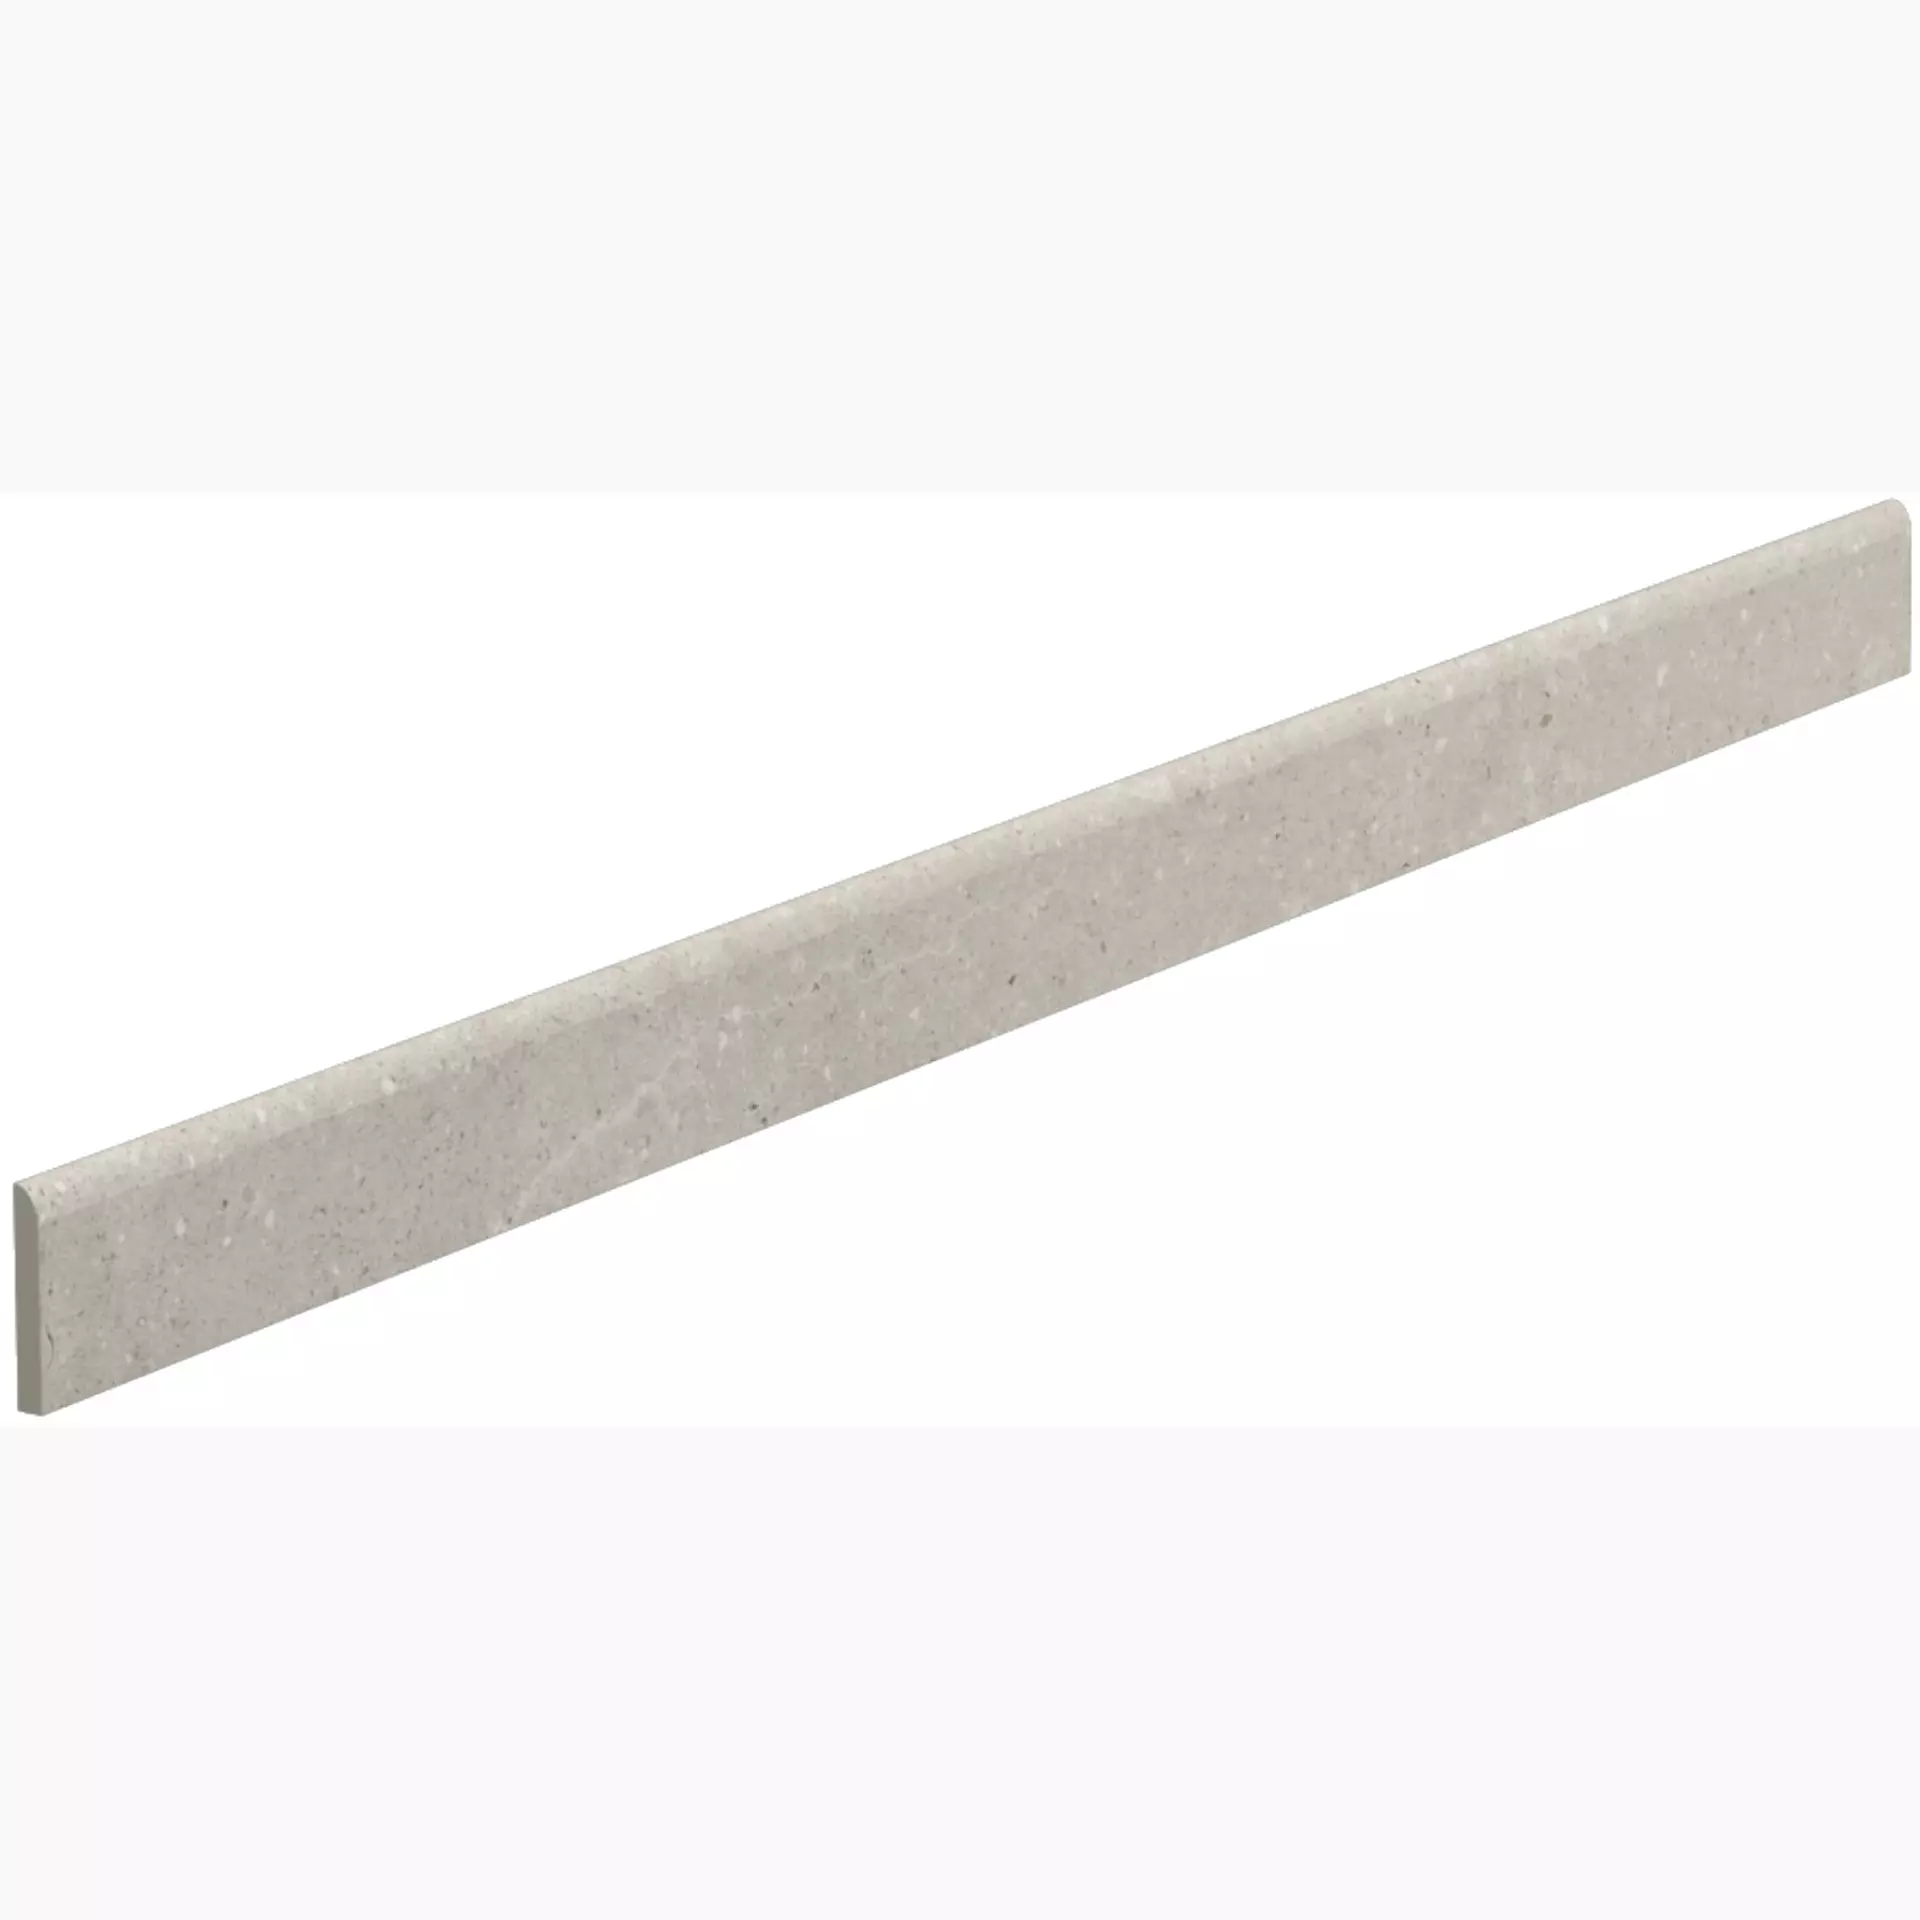 Del Conca Hwd Wild Grey Hwd05 Naturale Skirting board G0WD05R12 7x120cm rectified 8,5mm